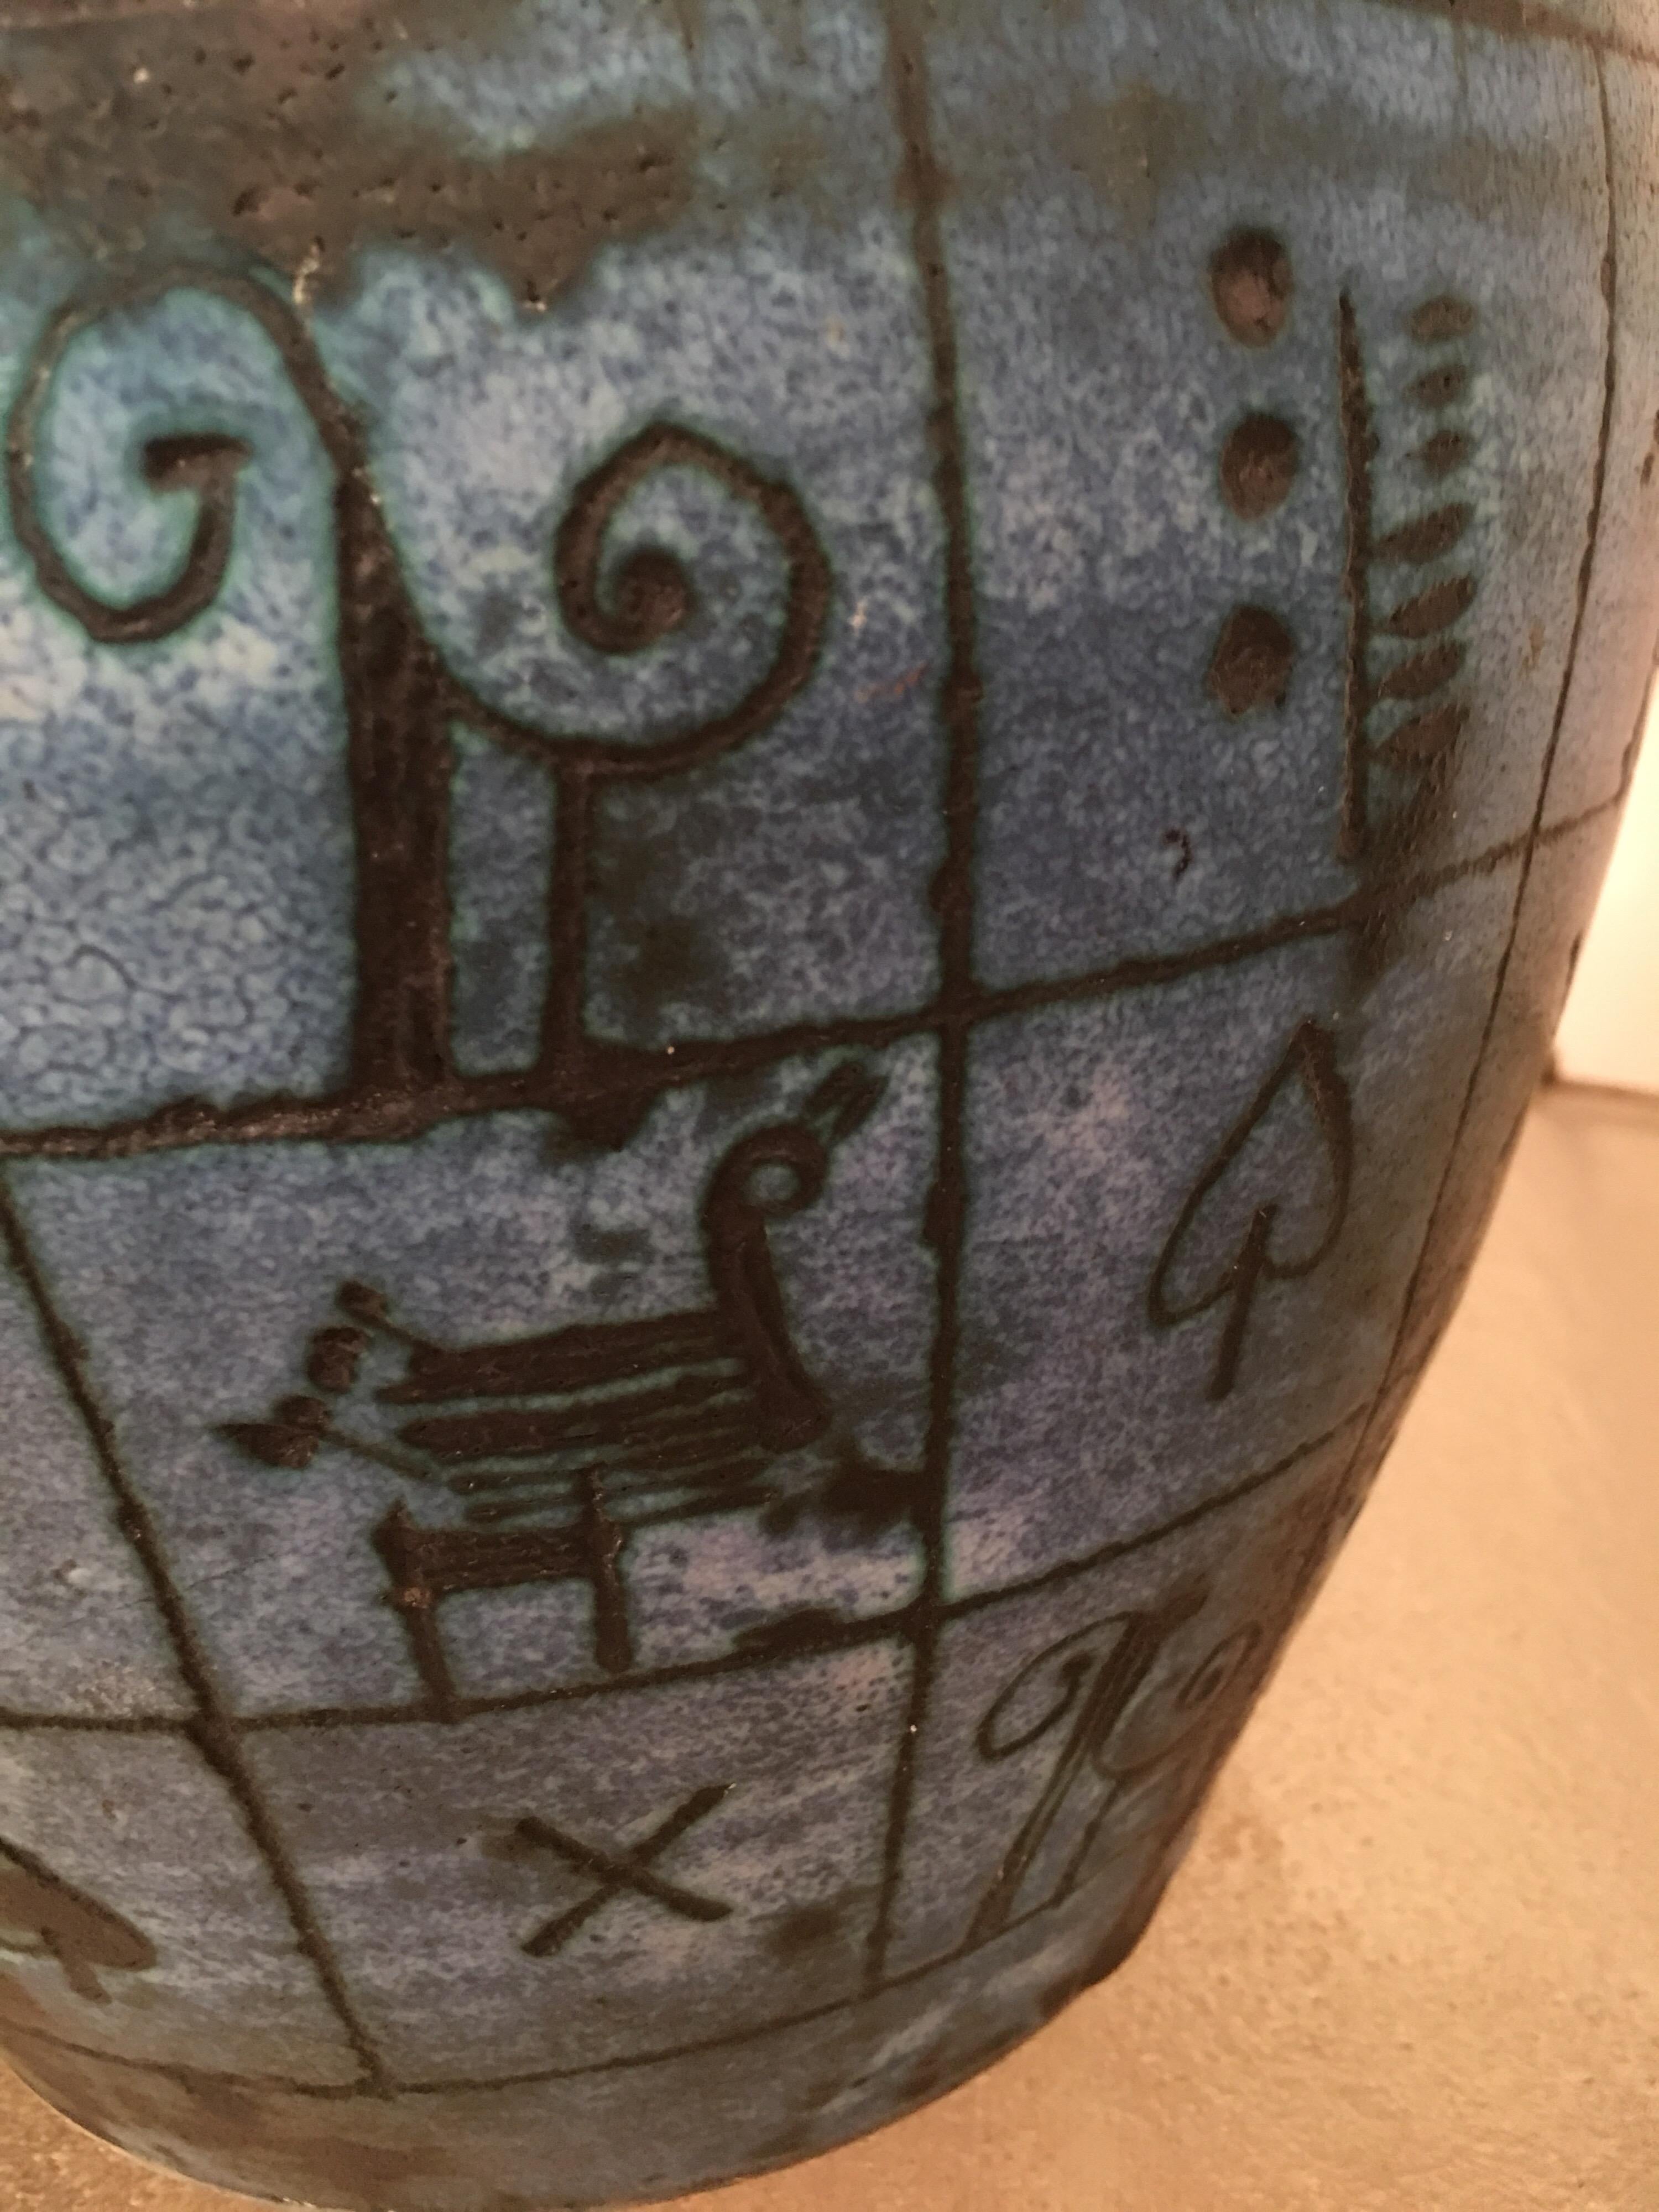 Jacques Blin Signed Large Blue Ceramic Vase, Incised Decor, French, 1960s For Sale 7